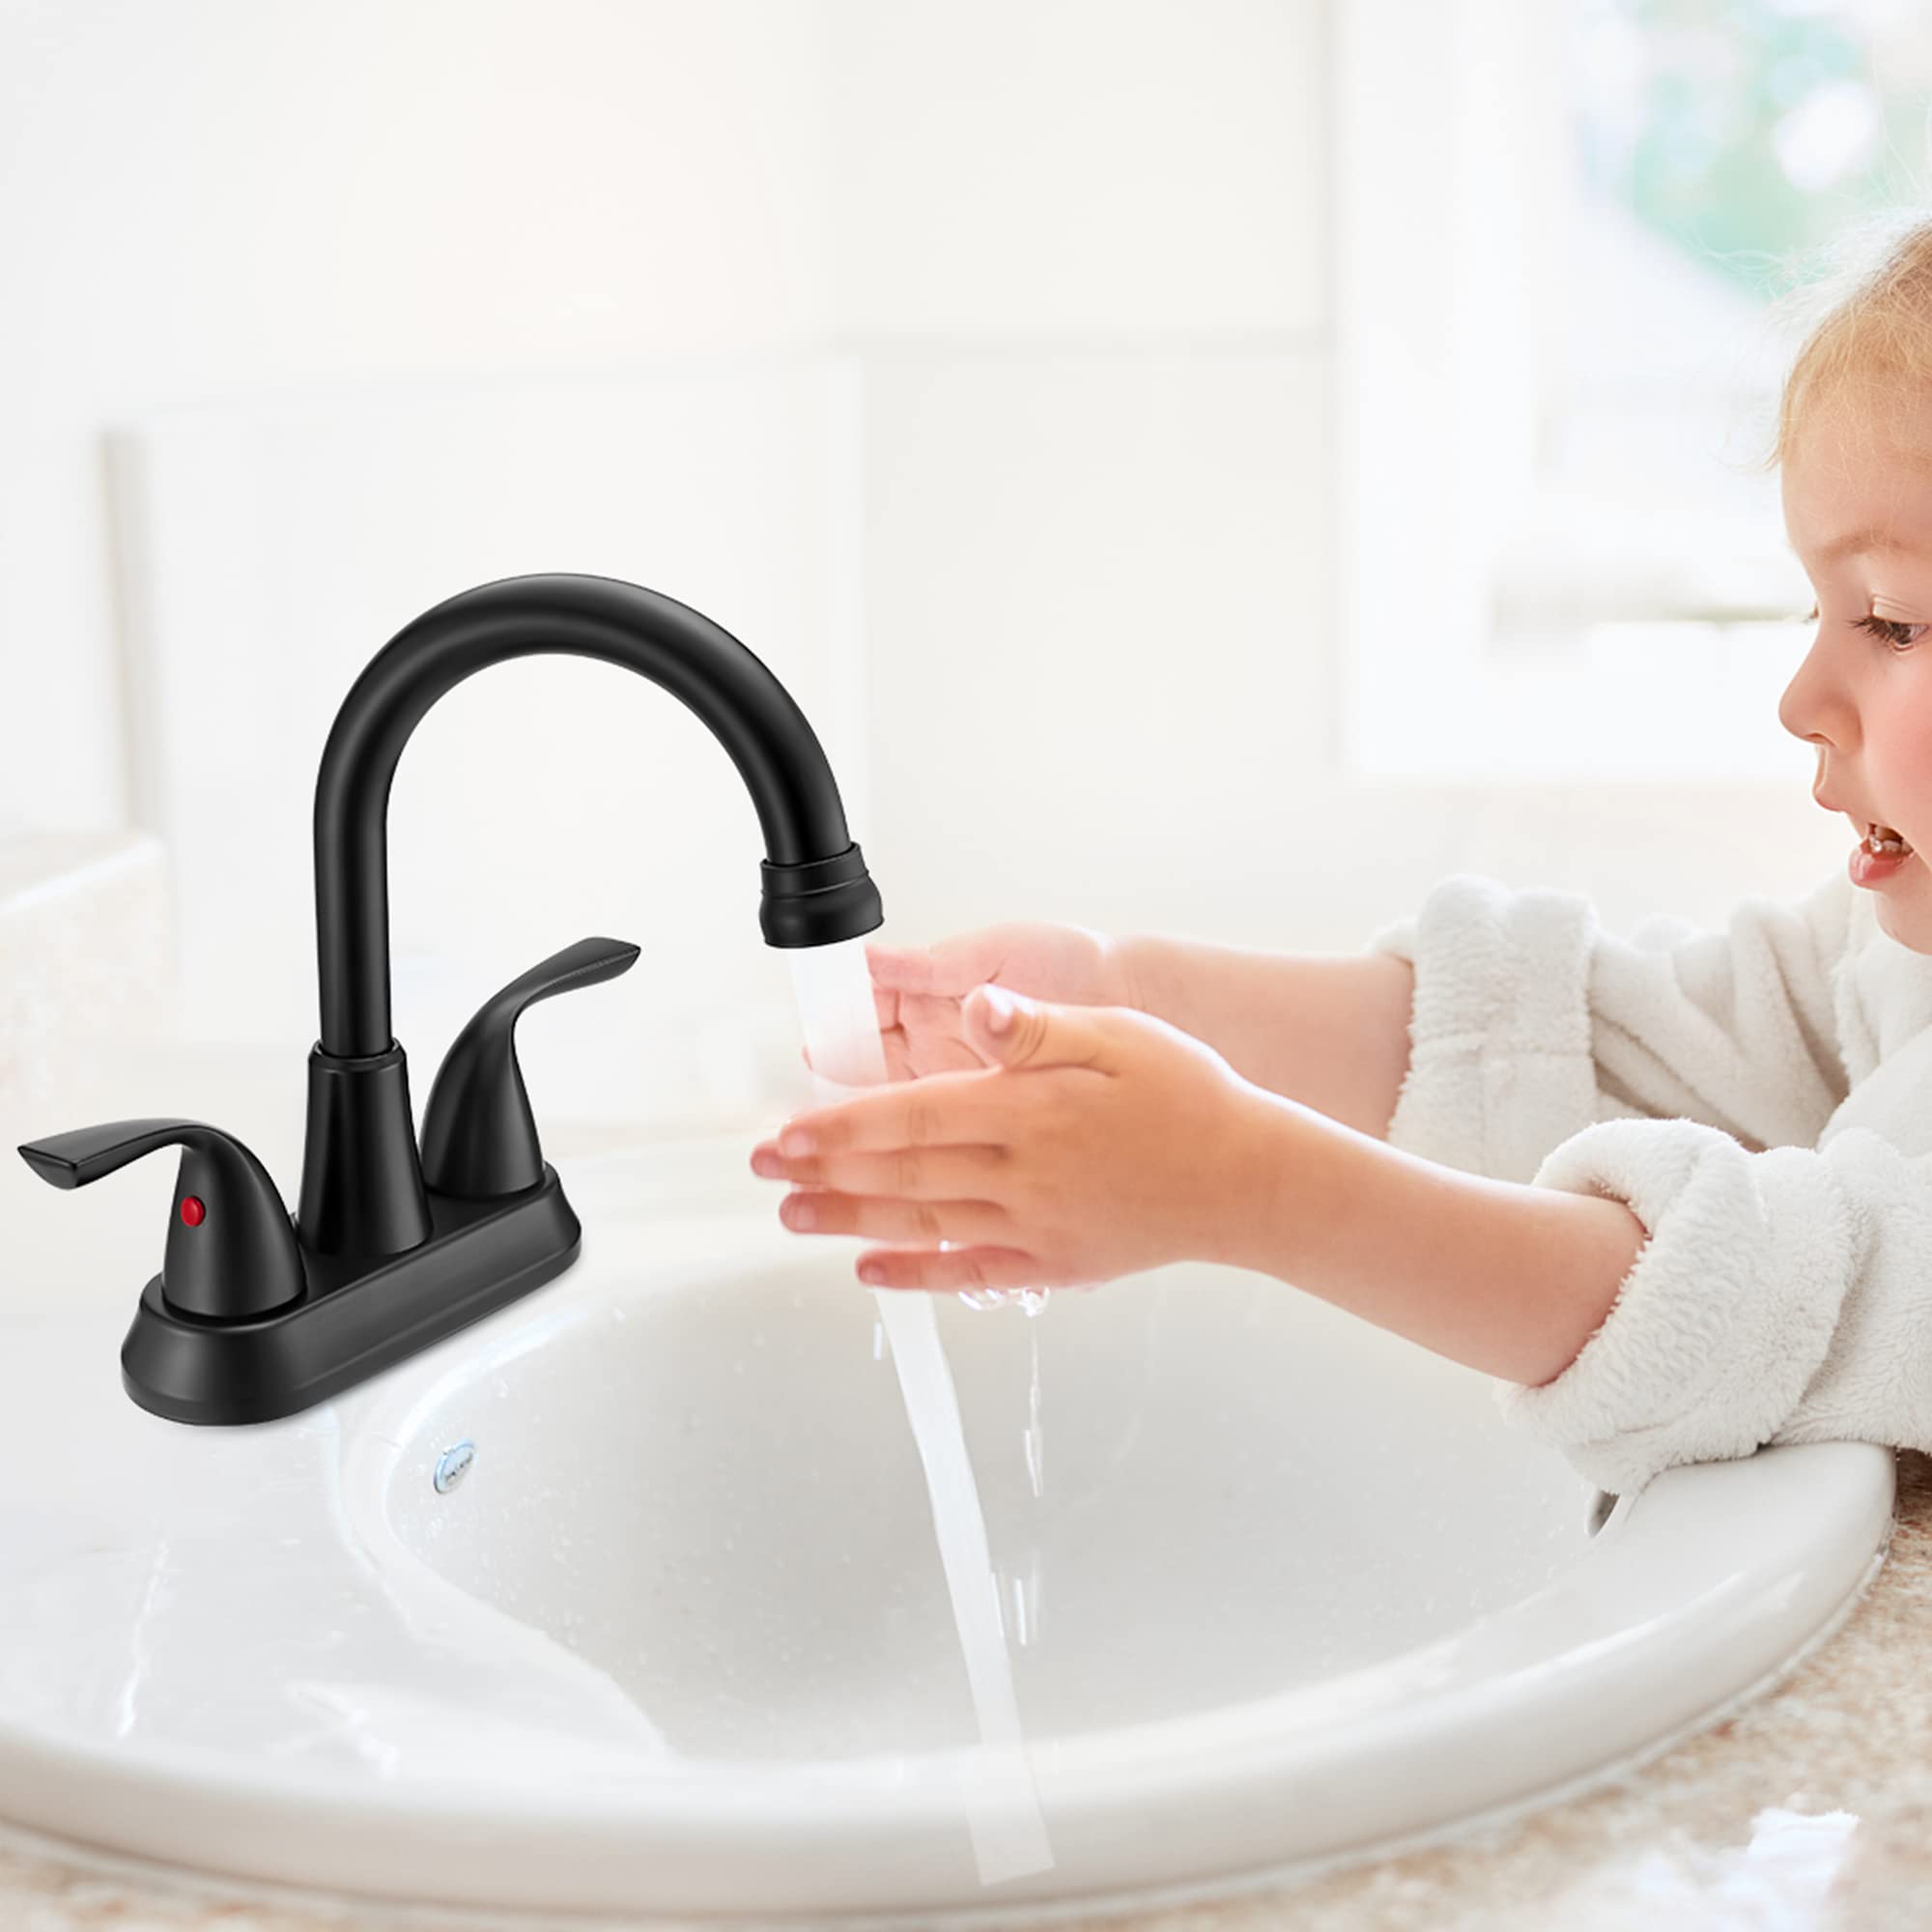 Bathroom Faucets, Faucet for Bathroom Sink 4 Inch 2 Handle Centerset, Bathroom Sink Faucet 3 Hole, Lead-Free, Matte Black Faucets for Bath Vanity Fixtures (Not Include Hot & Cold Water Lines)